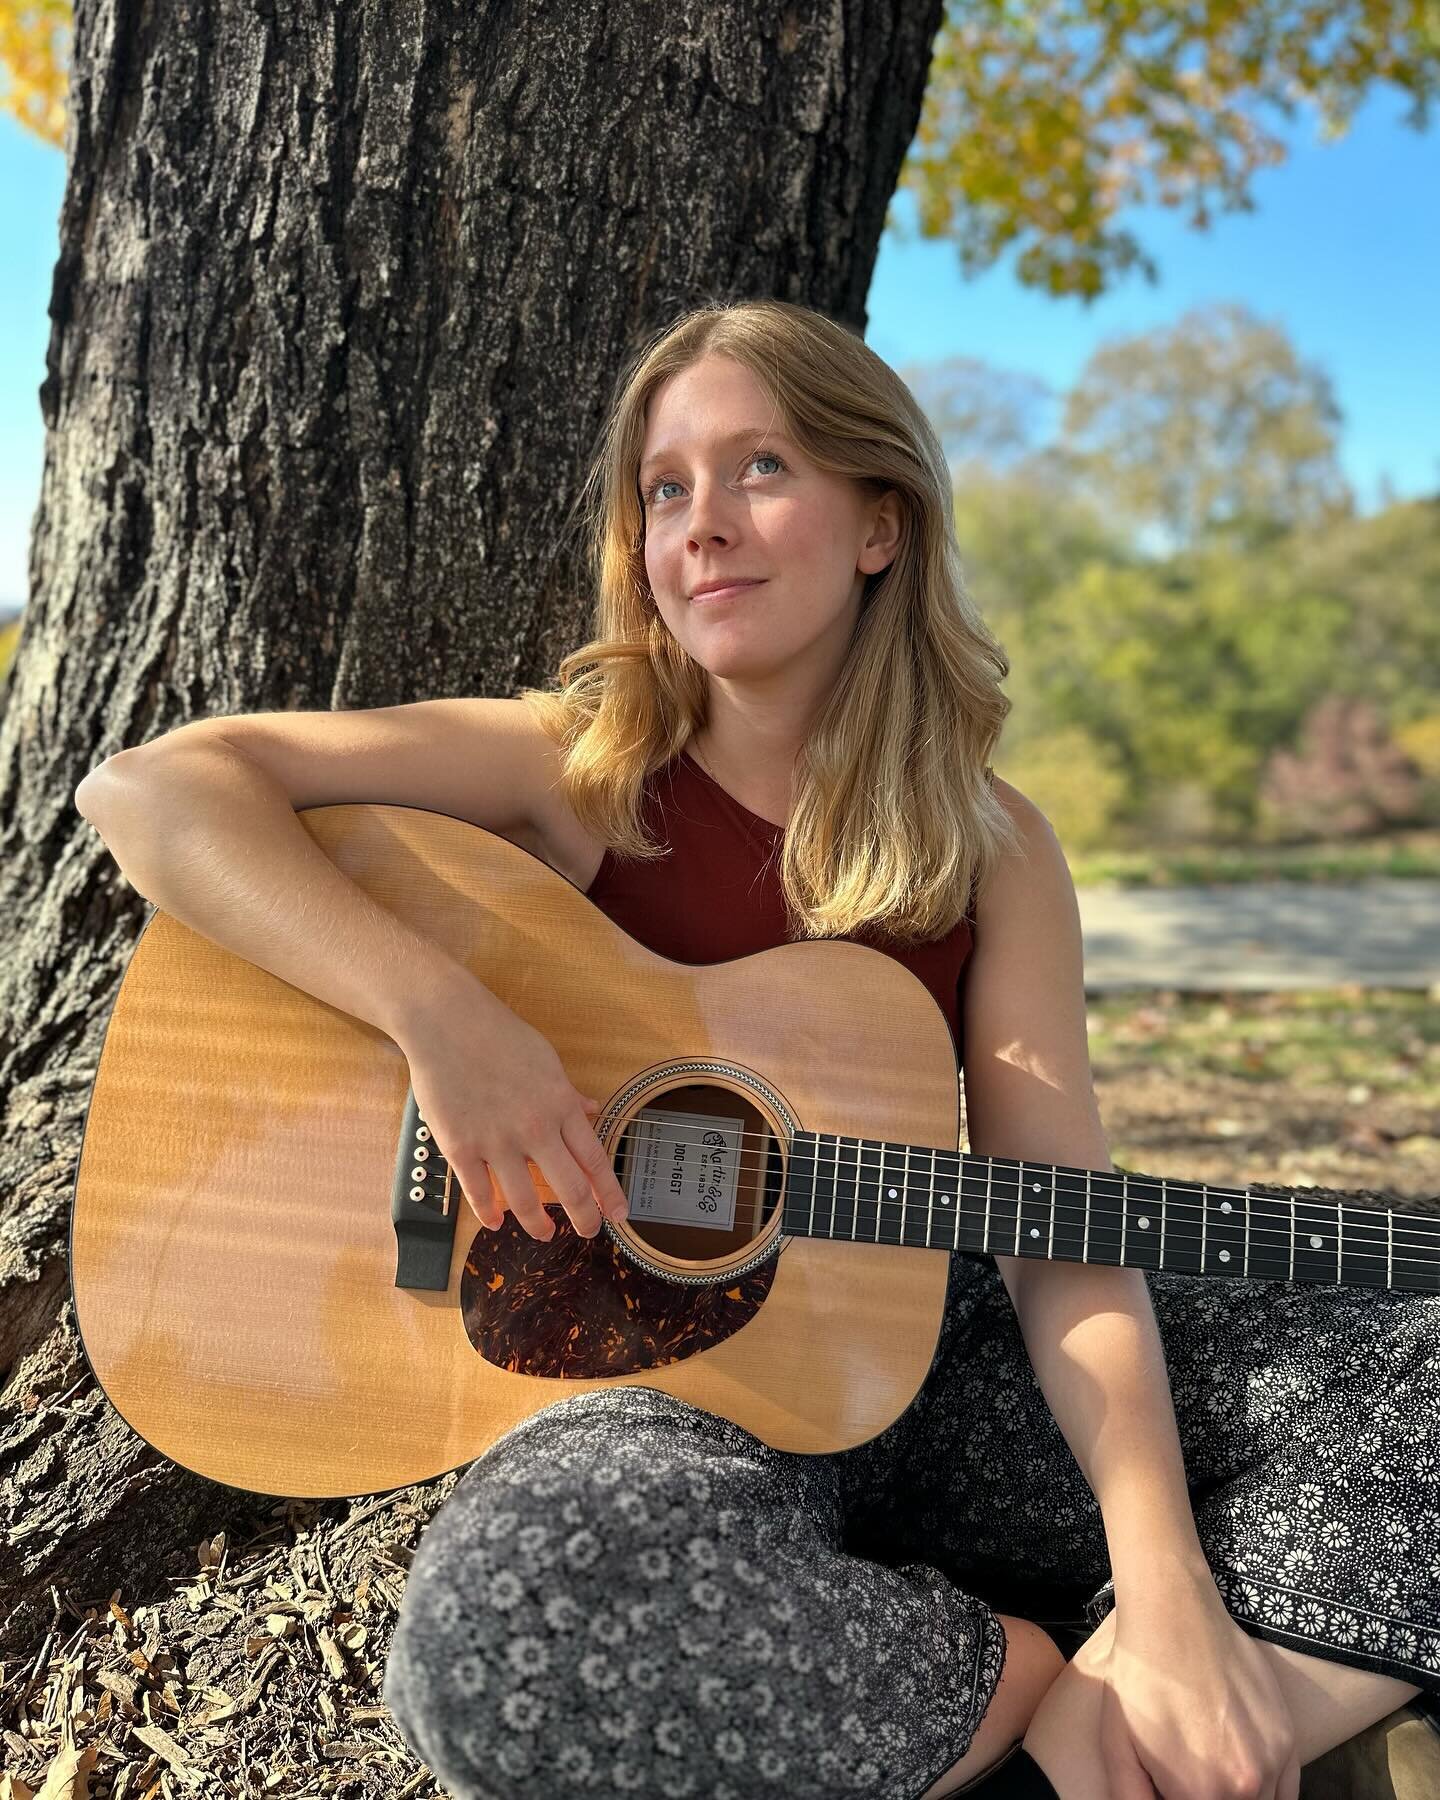 Did you know you can order a custom song from me?

I write and record personalized songs which make wonderful holidays gifts for your loved ones 🎁 you can order through my website or on @fiverr 🎄

Link in my bio for both!